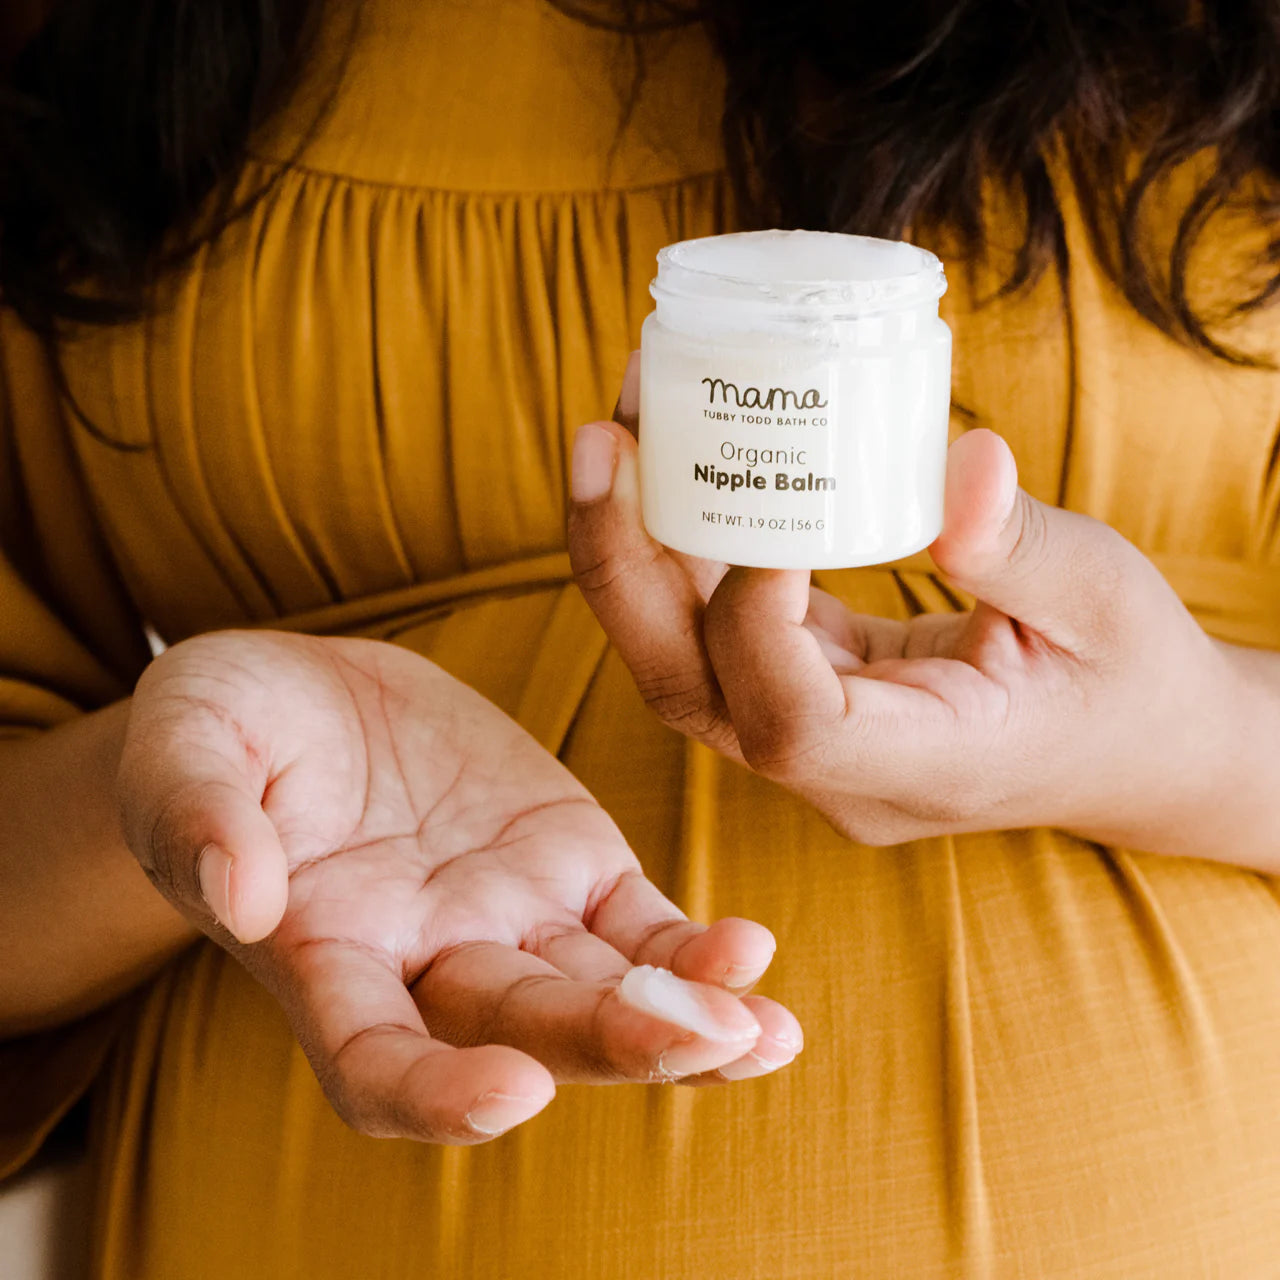 Mama showing Nipple Balm's texture on her finger and holding the jar.